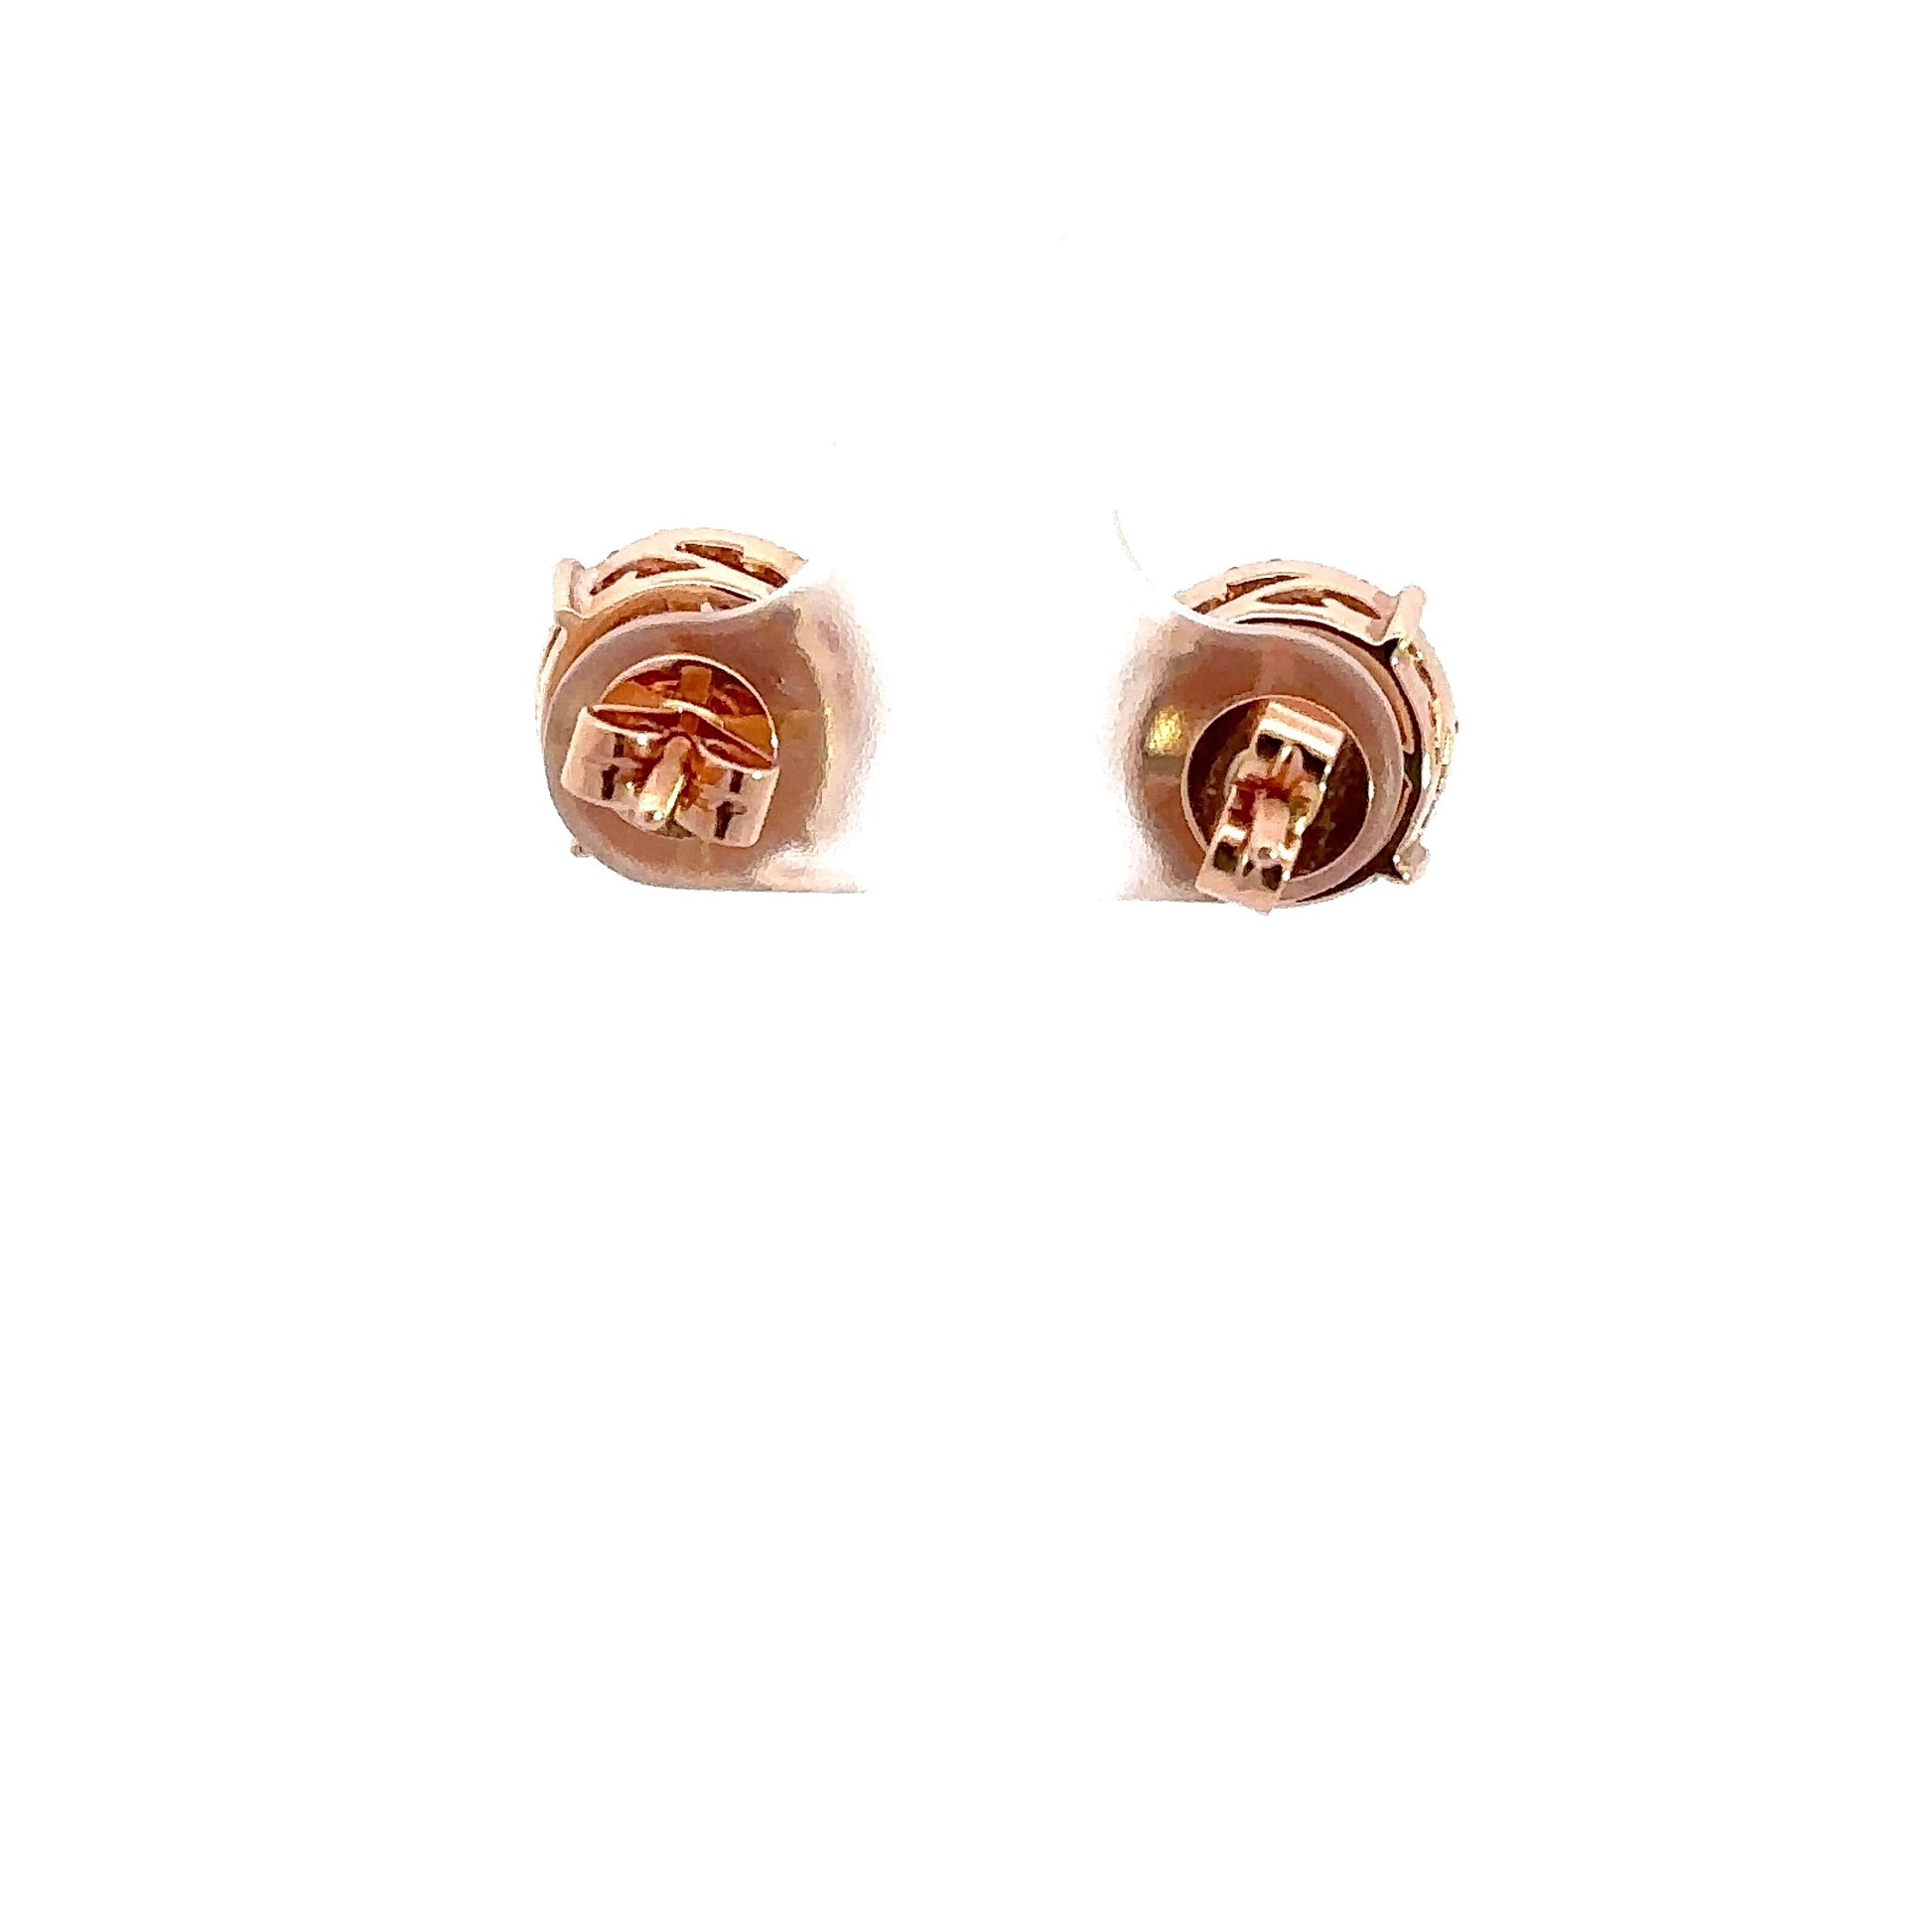 back of rose gold earrings with screwbacks